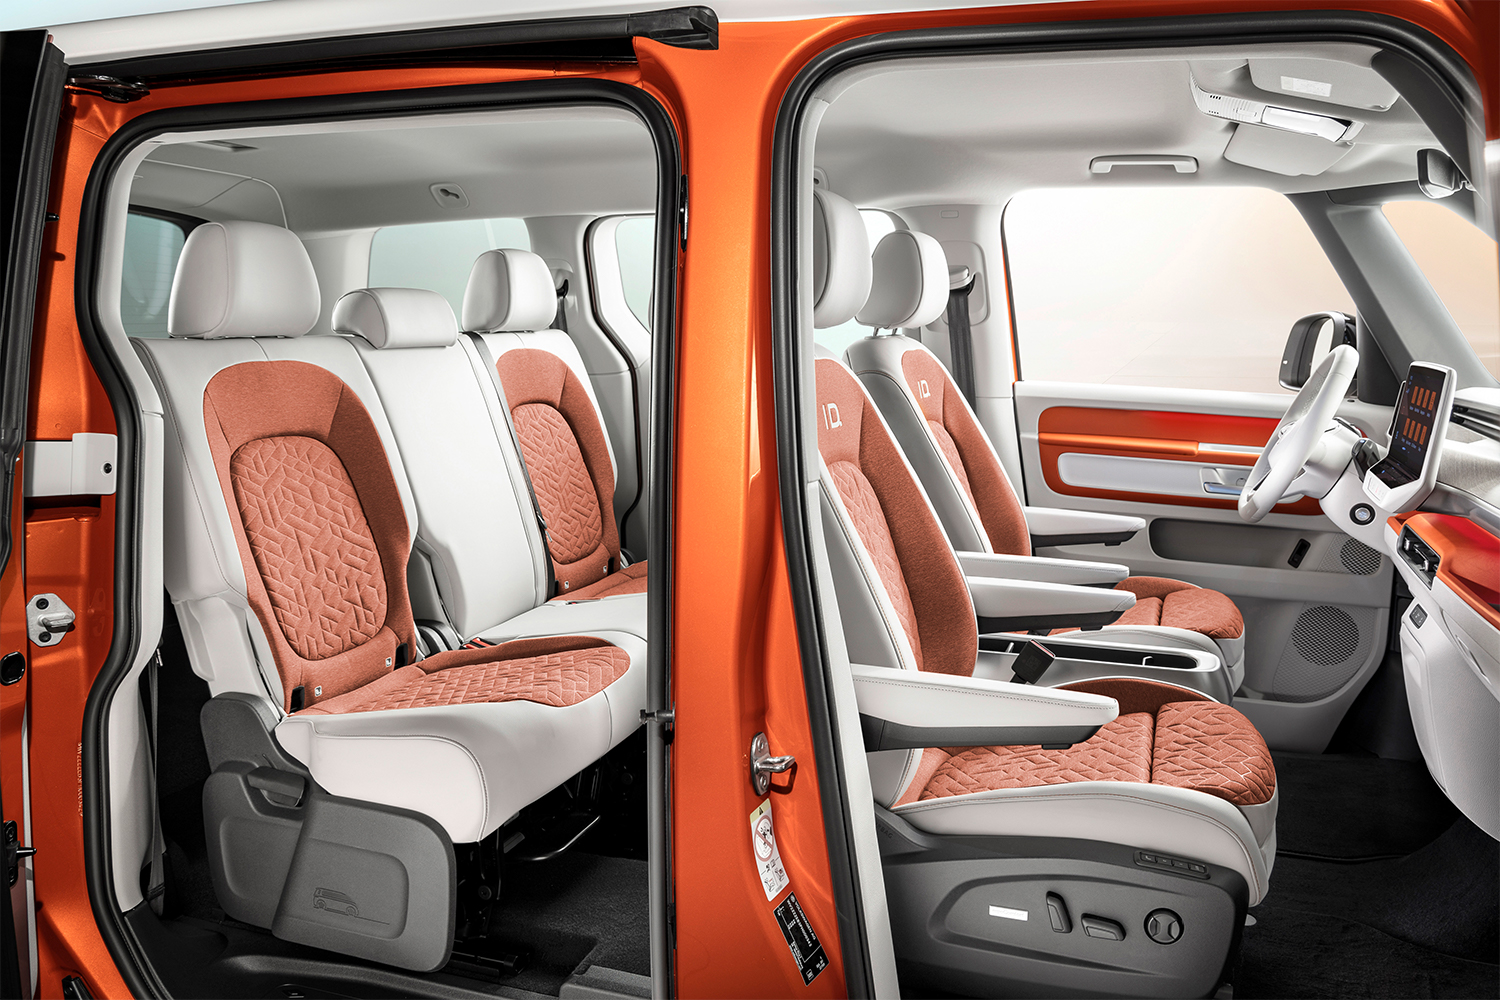 The interior of the new Volkswagen ID. Buzz, an electric passenger van based on the VW Microbus, showing white and orange seats in two rows